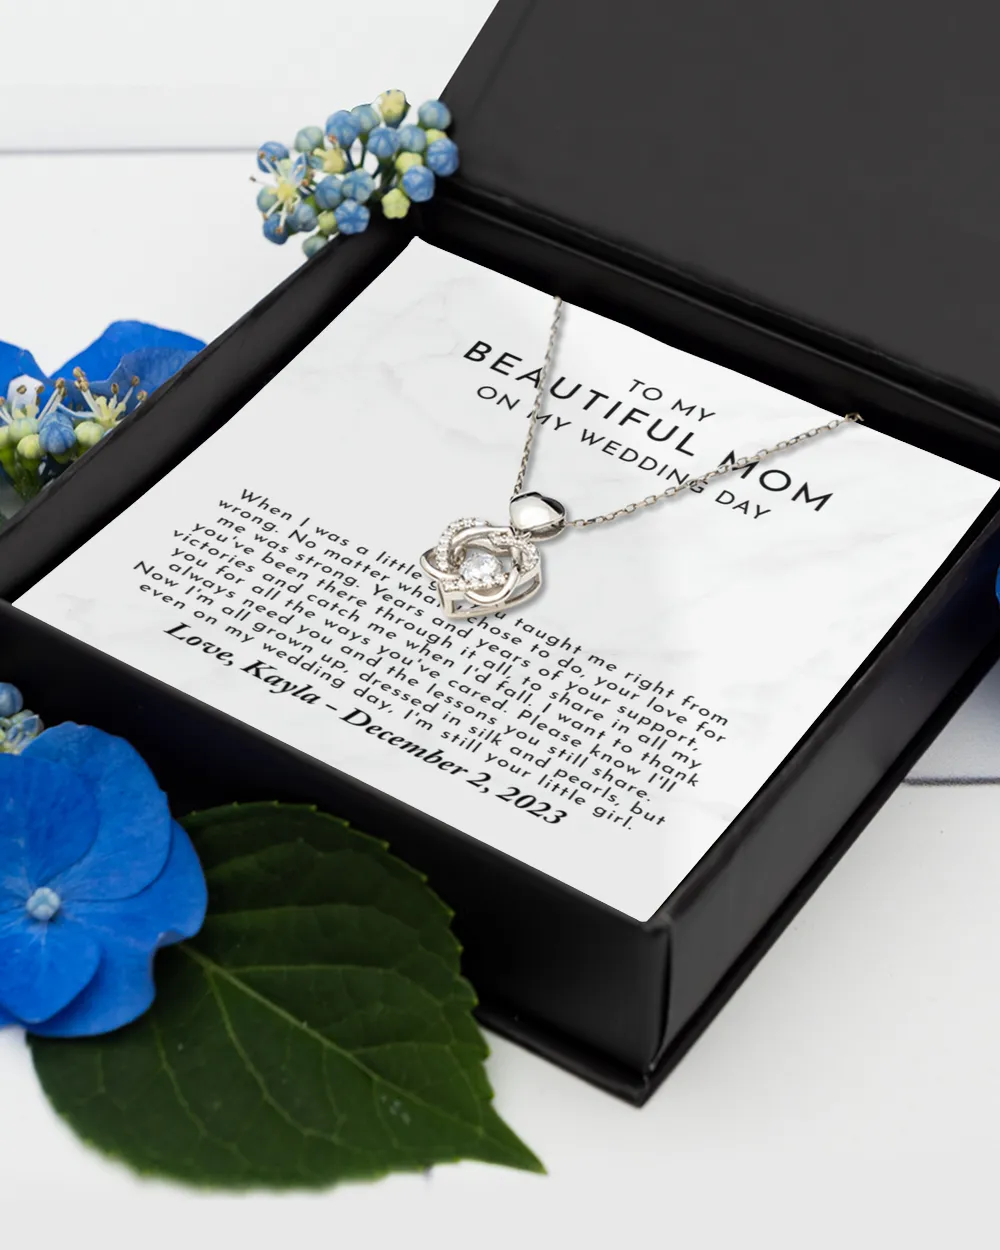 Mother of the Bride Heart Knot Necklace, Mother of the Bride Gifts, Mom Wedding Gift from Bride, Mother of the Bride Gift from Daughter, Gifts For Mom